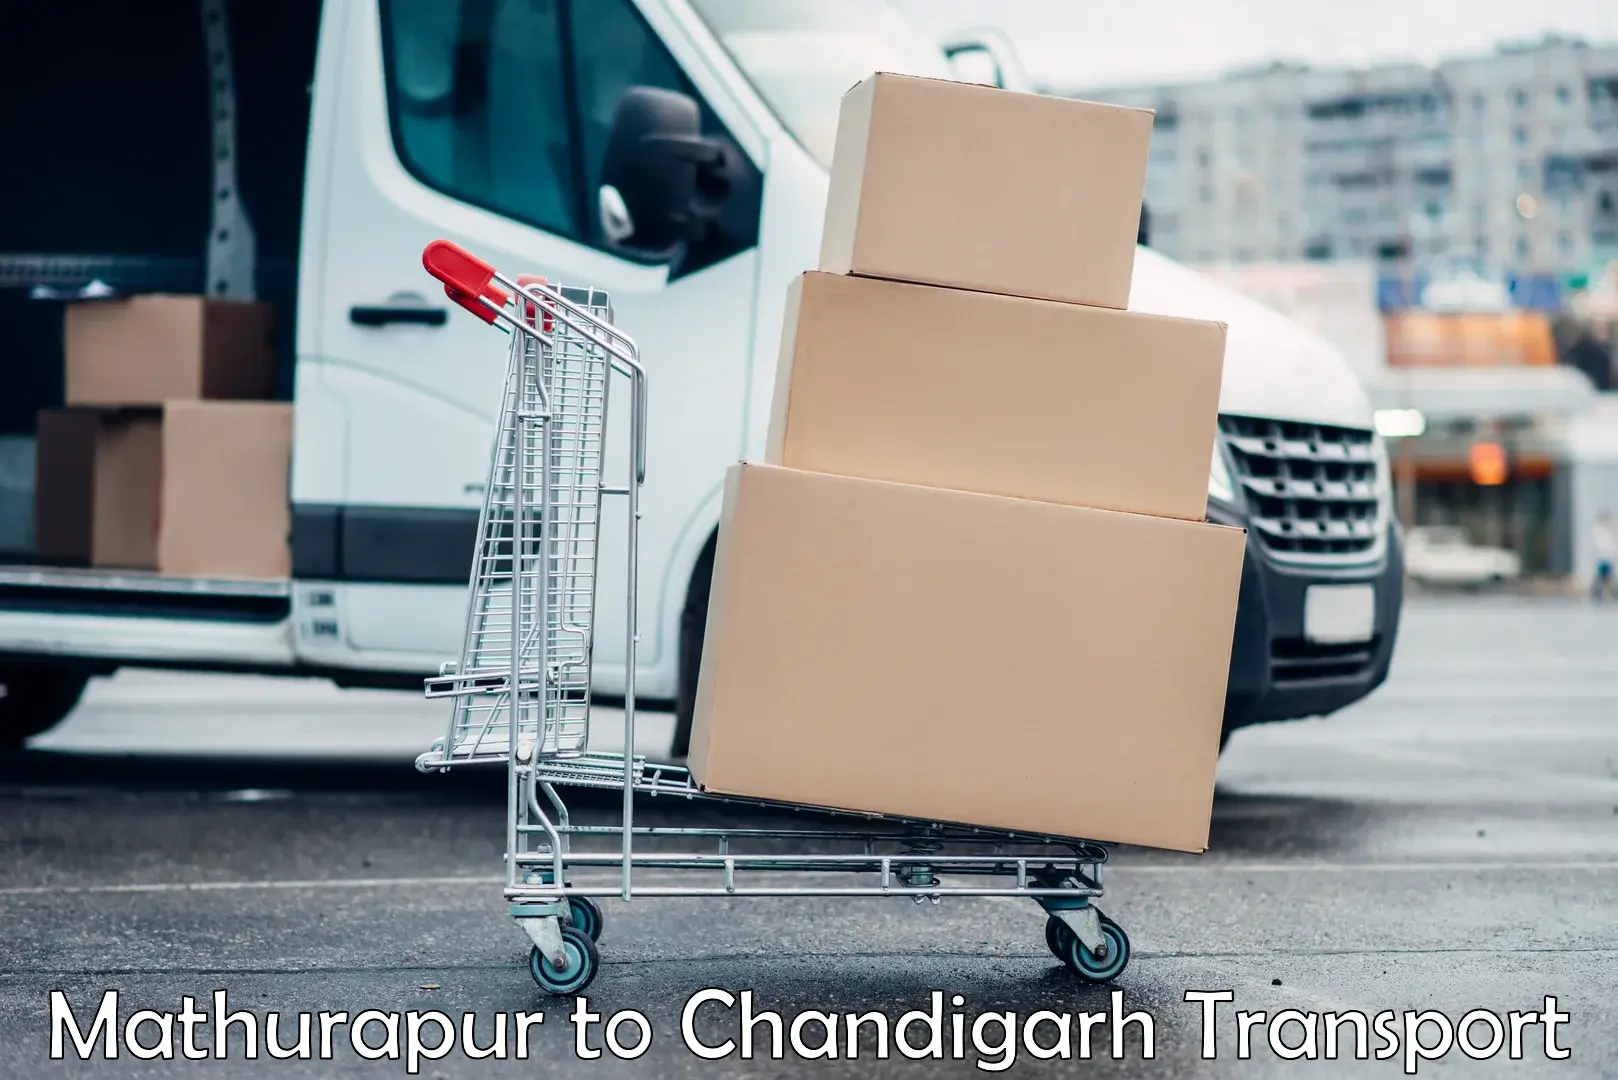 Part load transport service in India Mathurapur to Chandigarh